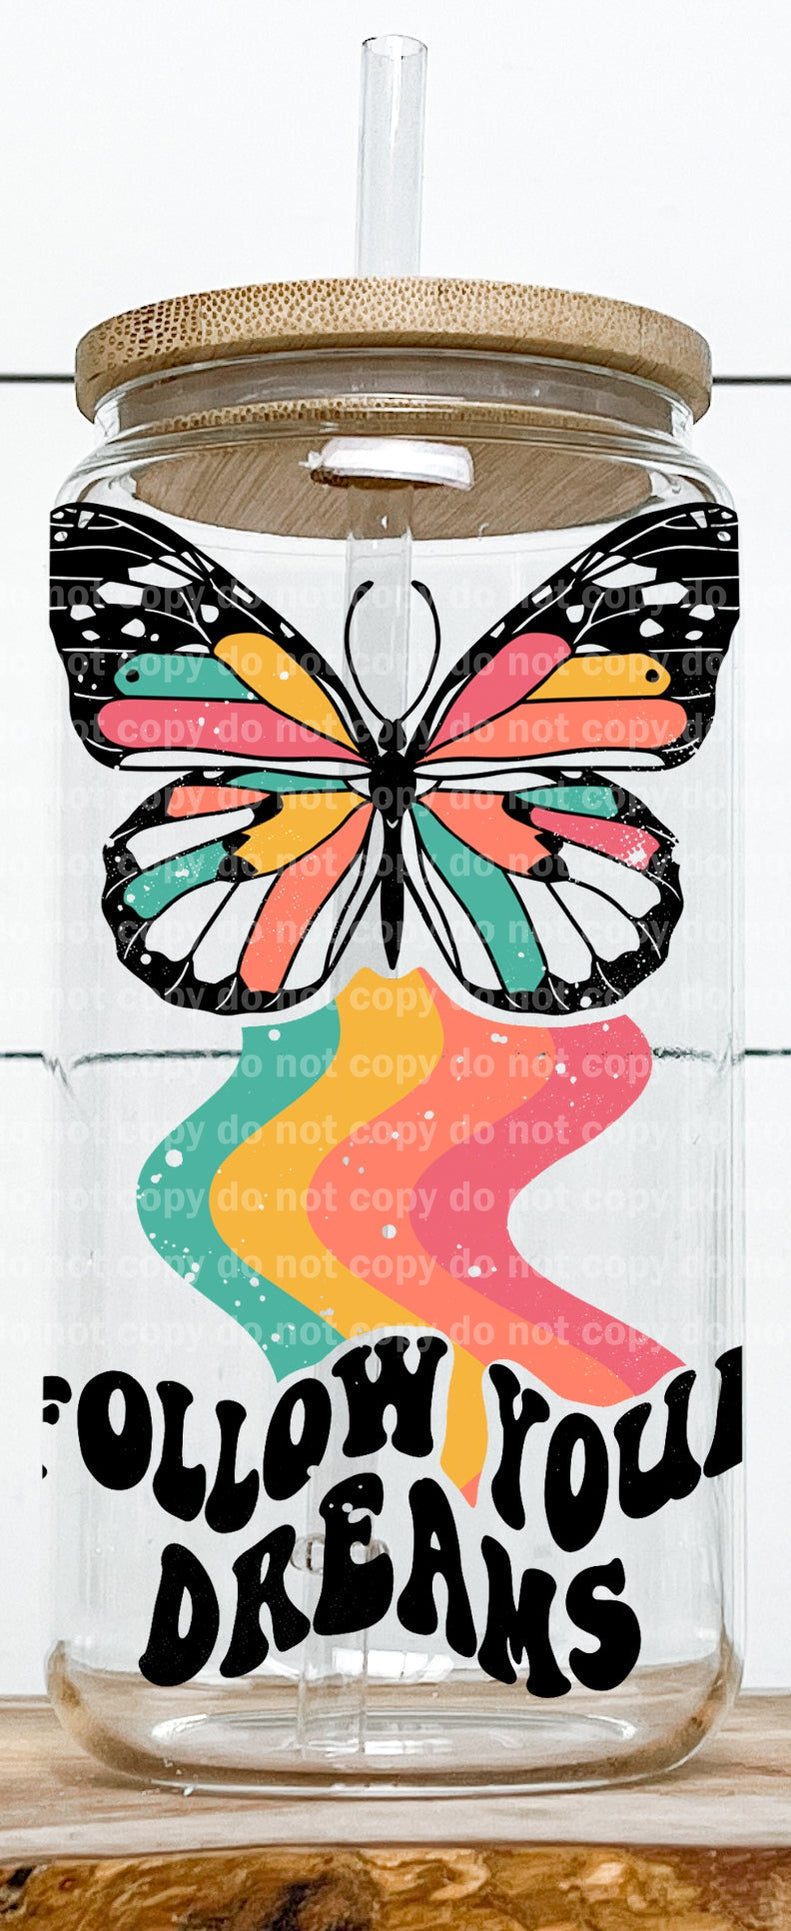 Follow Your Dreams Butterfly Decal 3.4 x 5